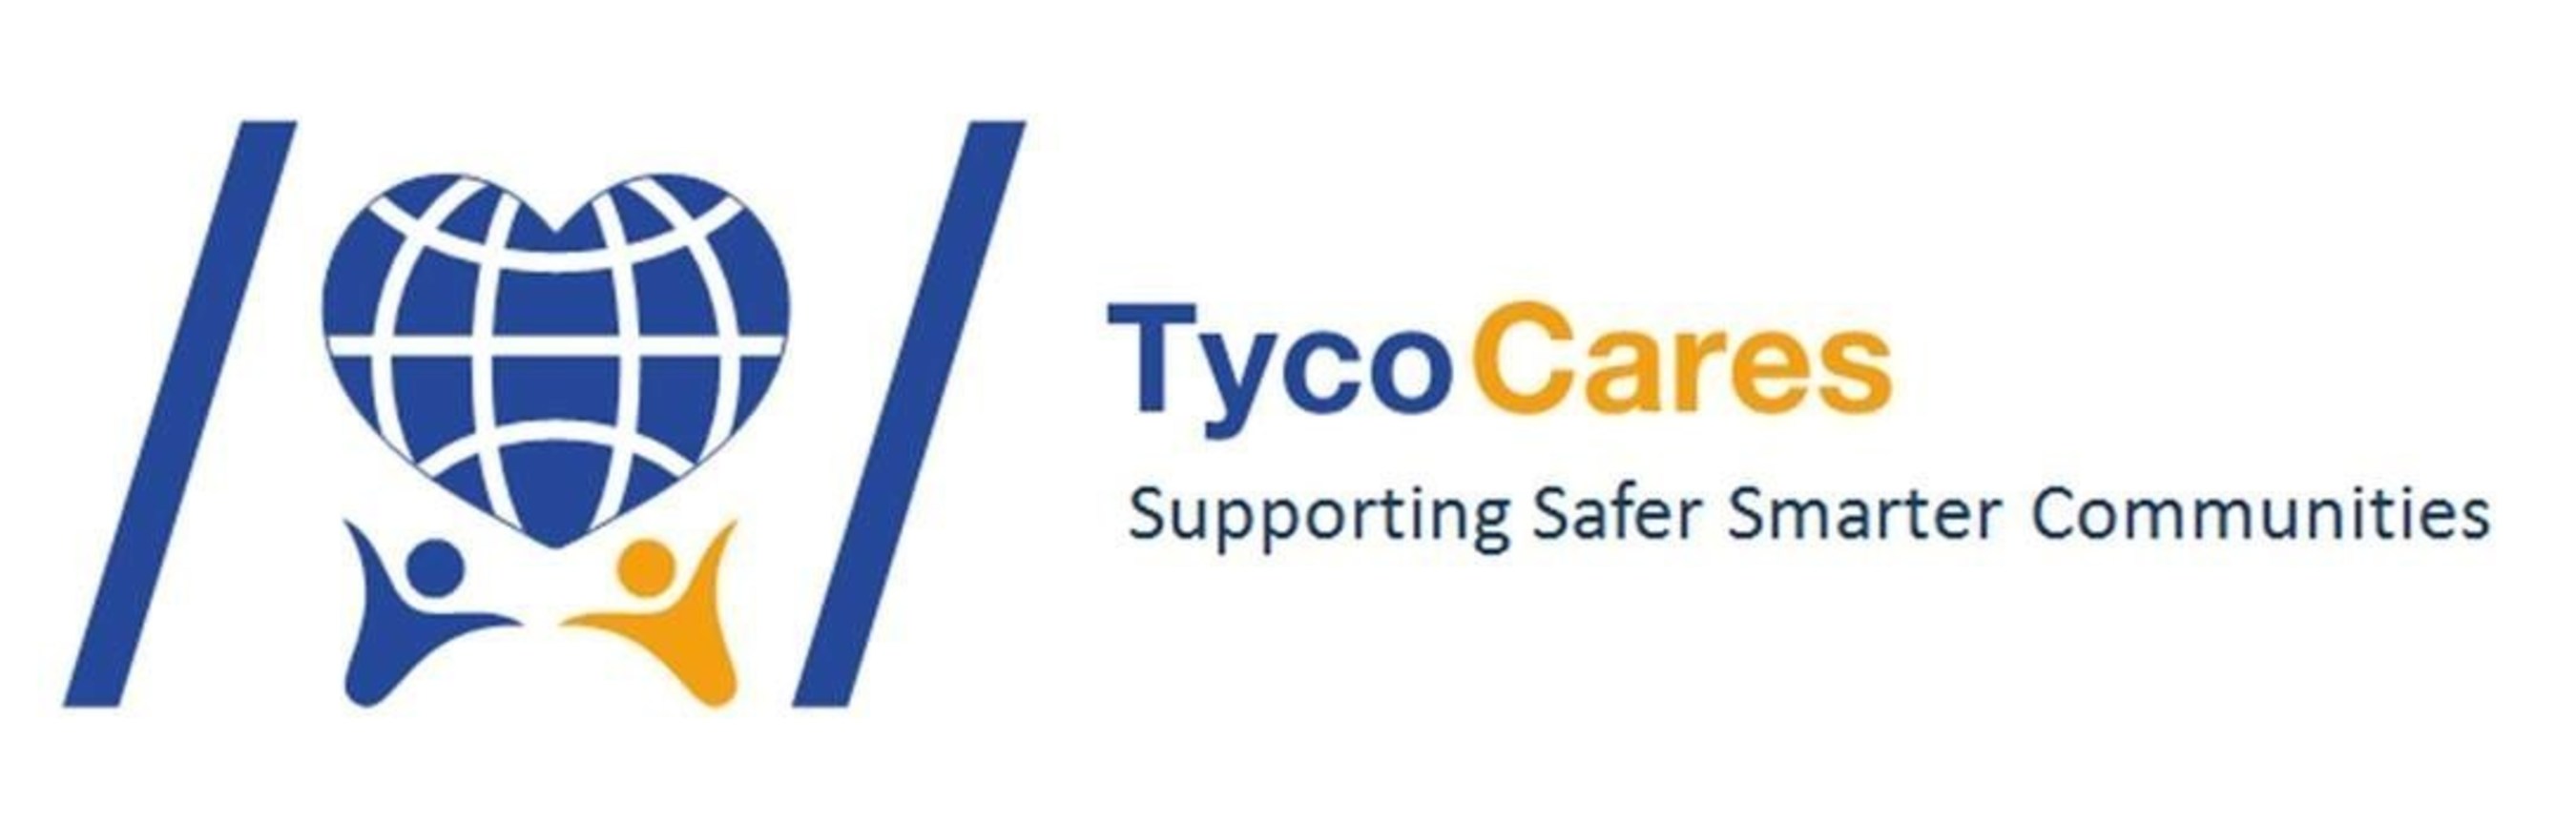 Tyco launches its renewed global corporate social responsibility initiative with a new brand, "Tyco Cares"